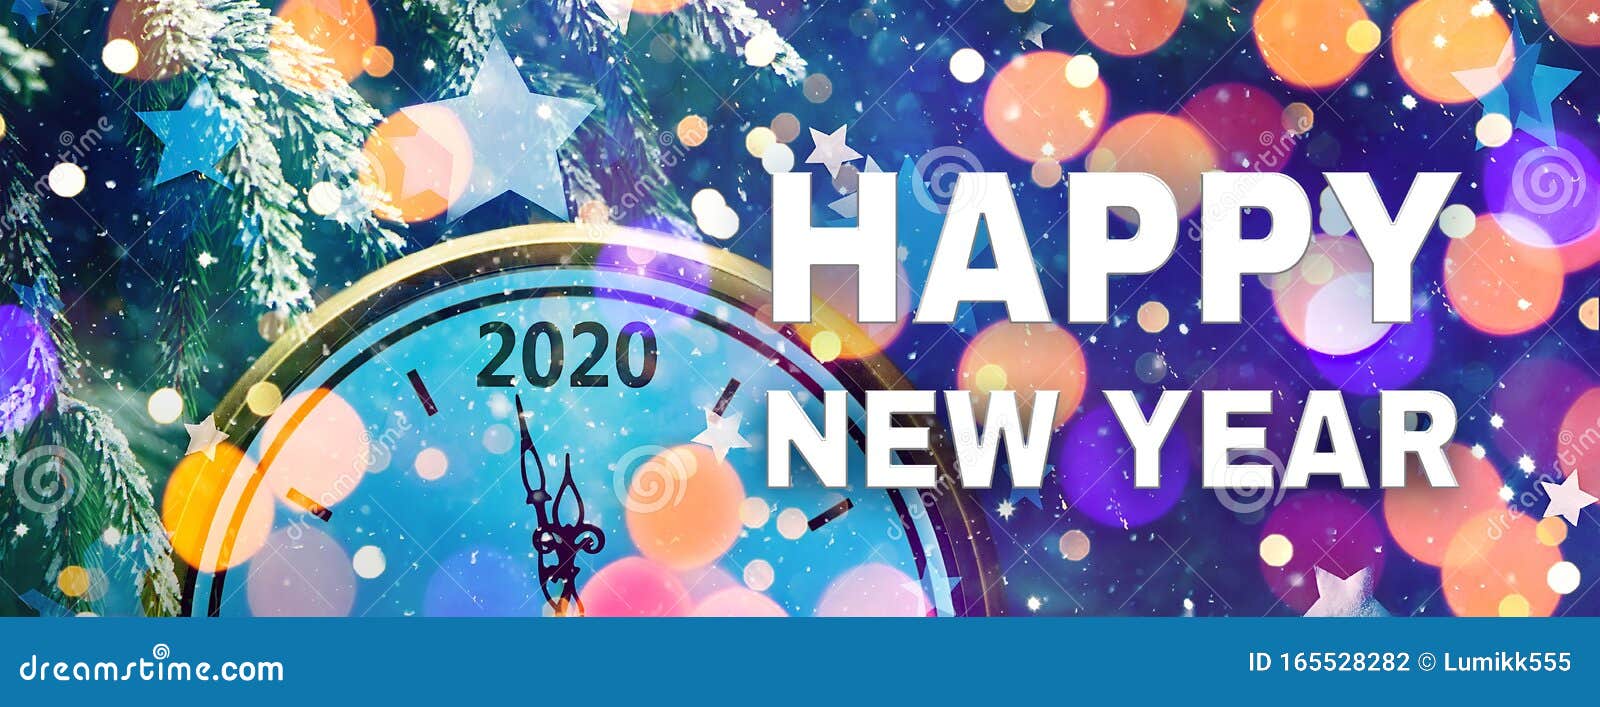 Creative Colorful Holiday Web Banner Happy New Year 2020 Stock ...